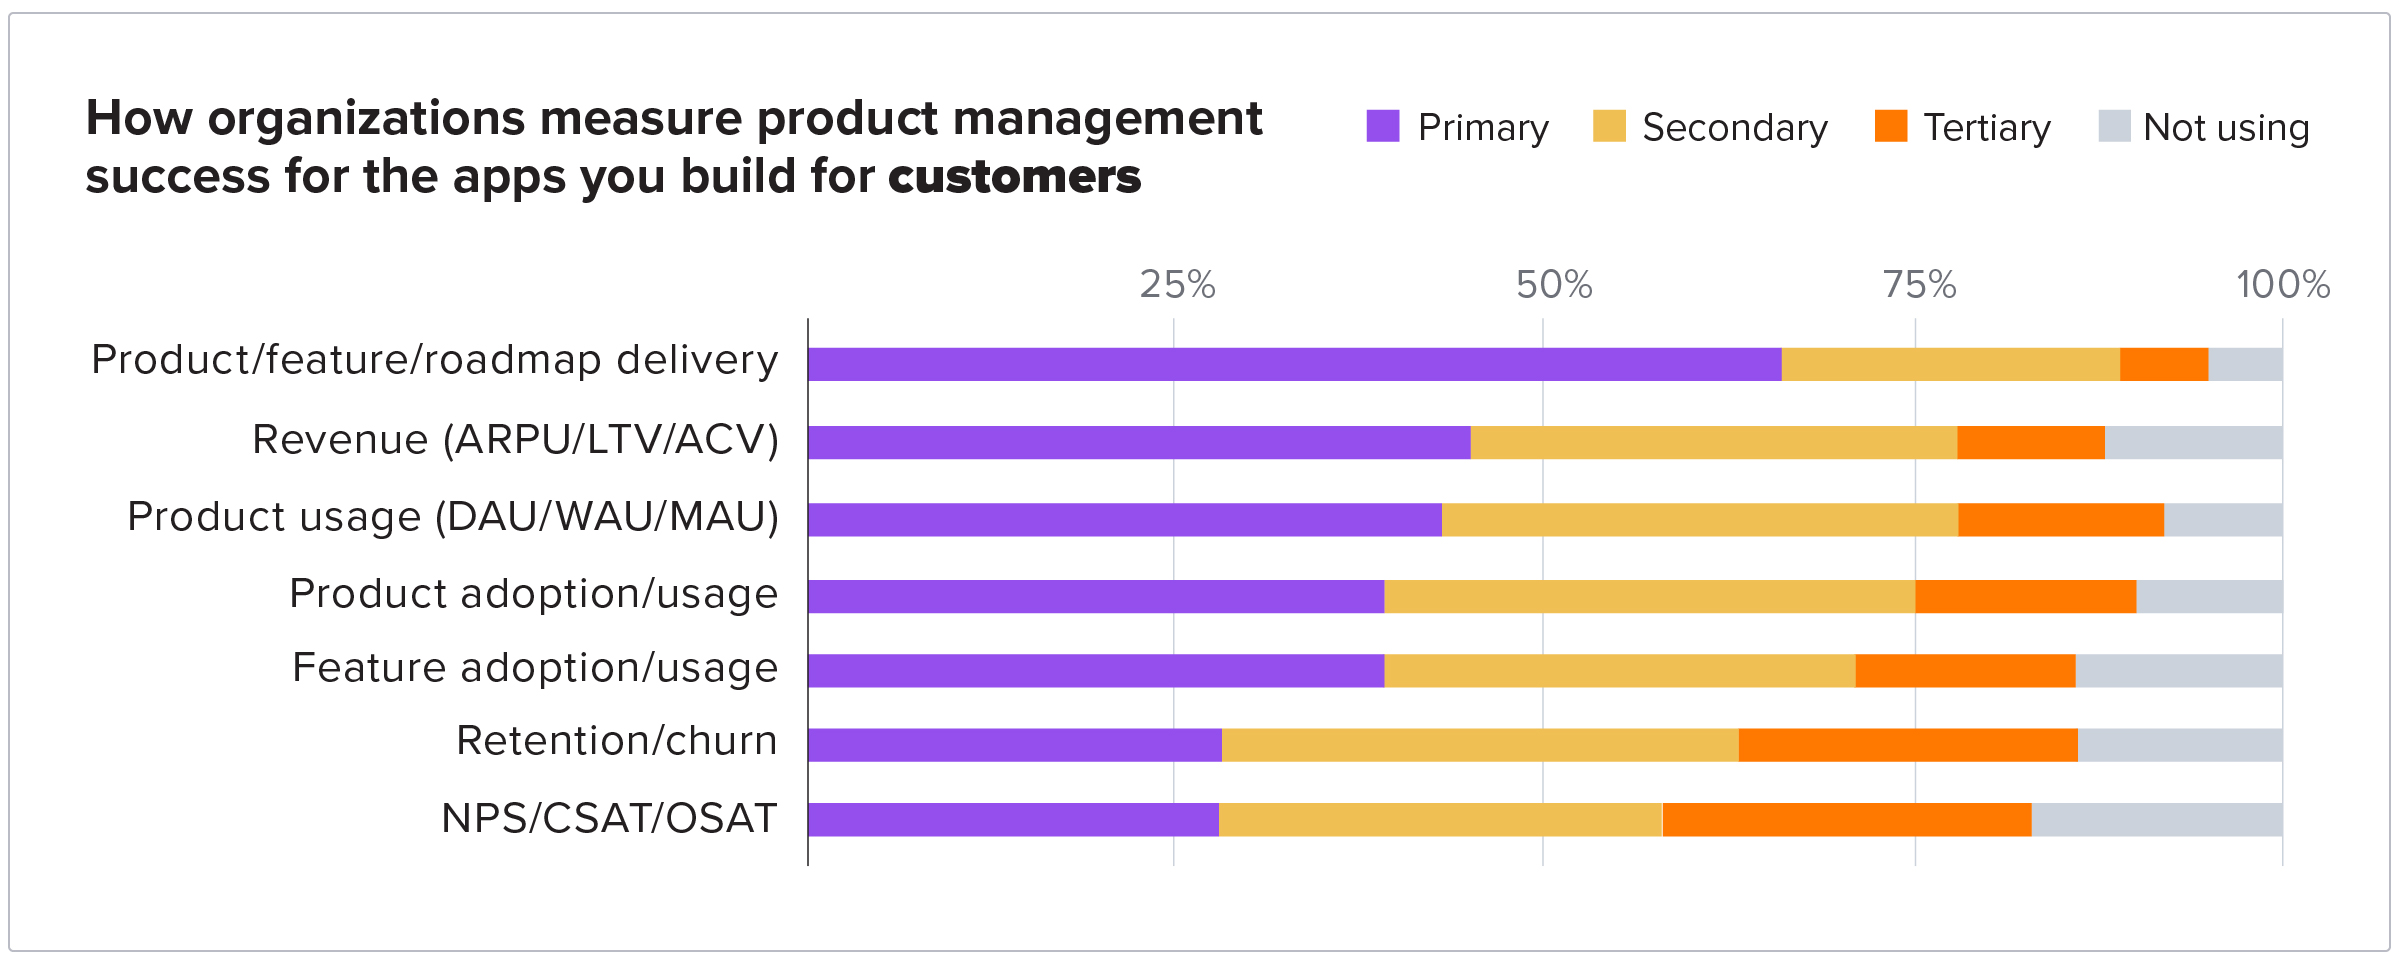 How organizations measure product management success for apps you build for customers